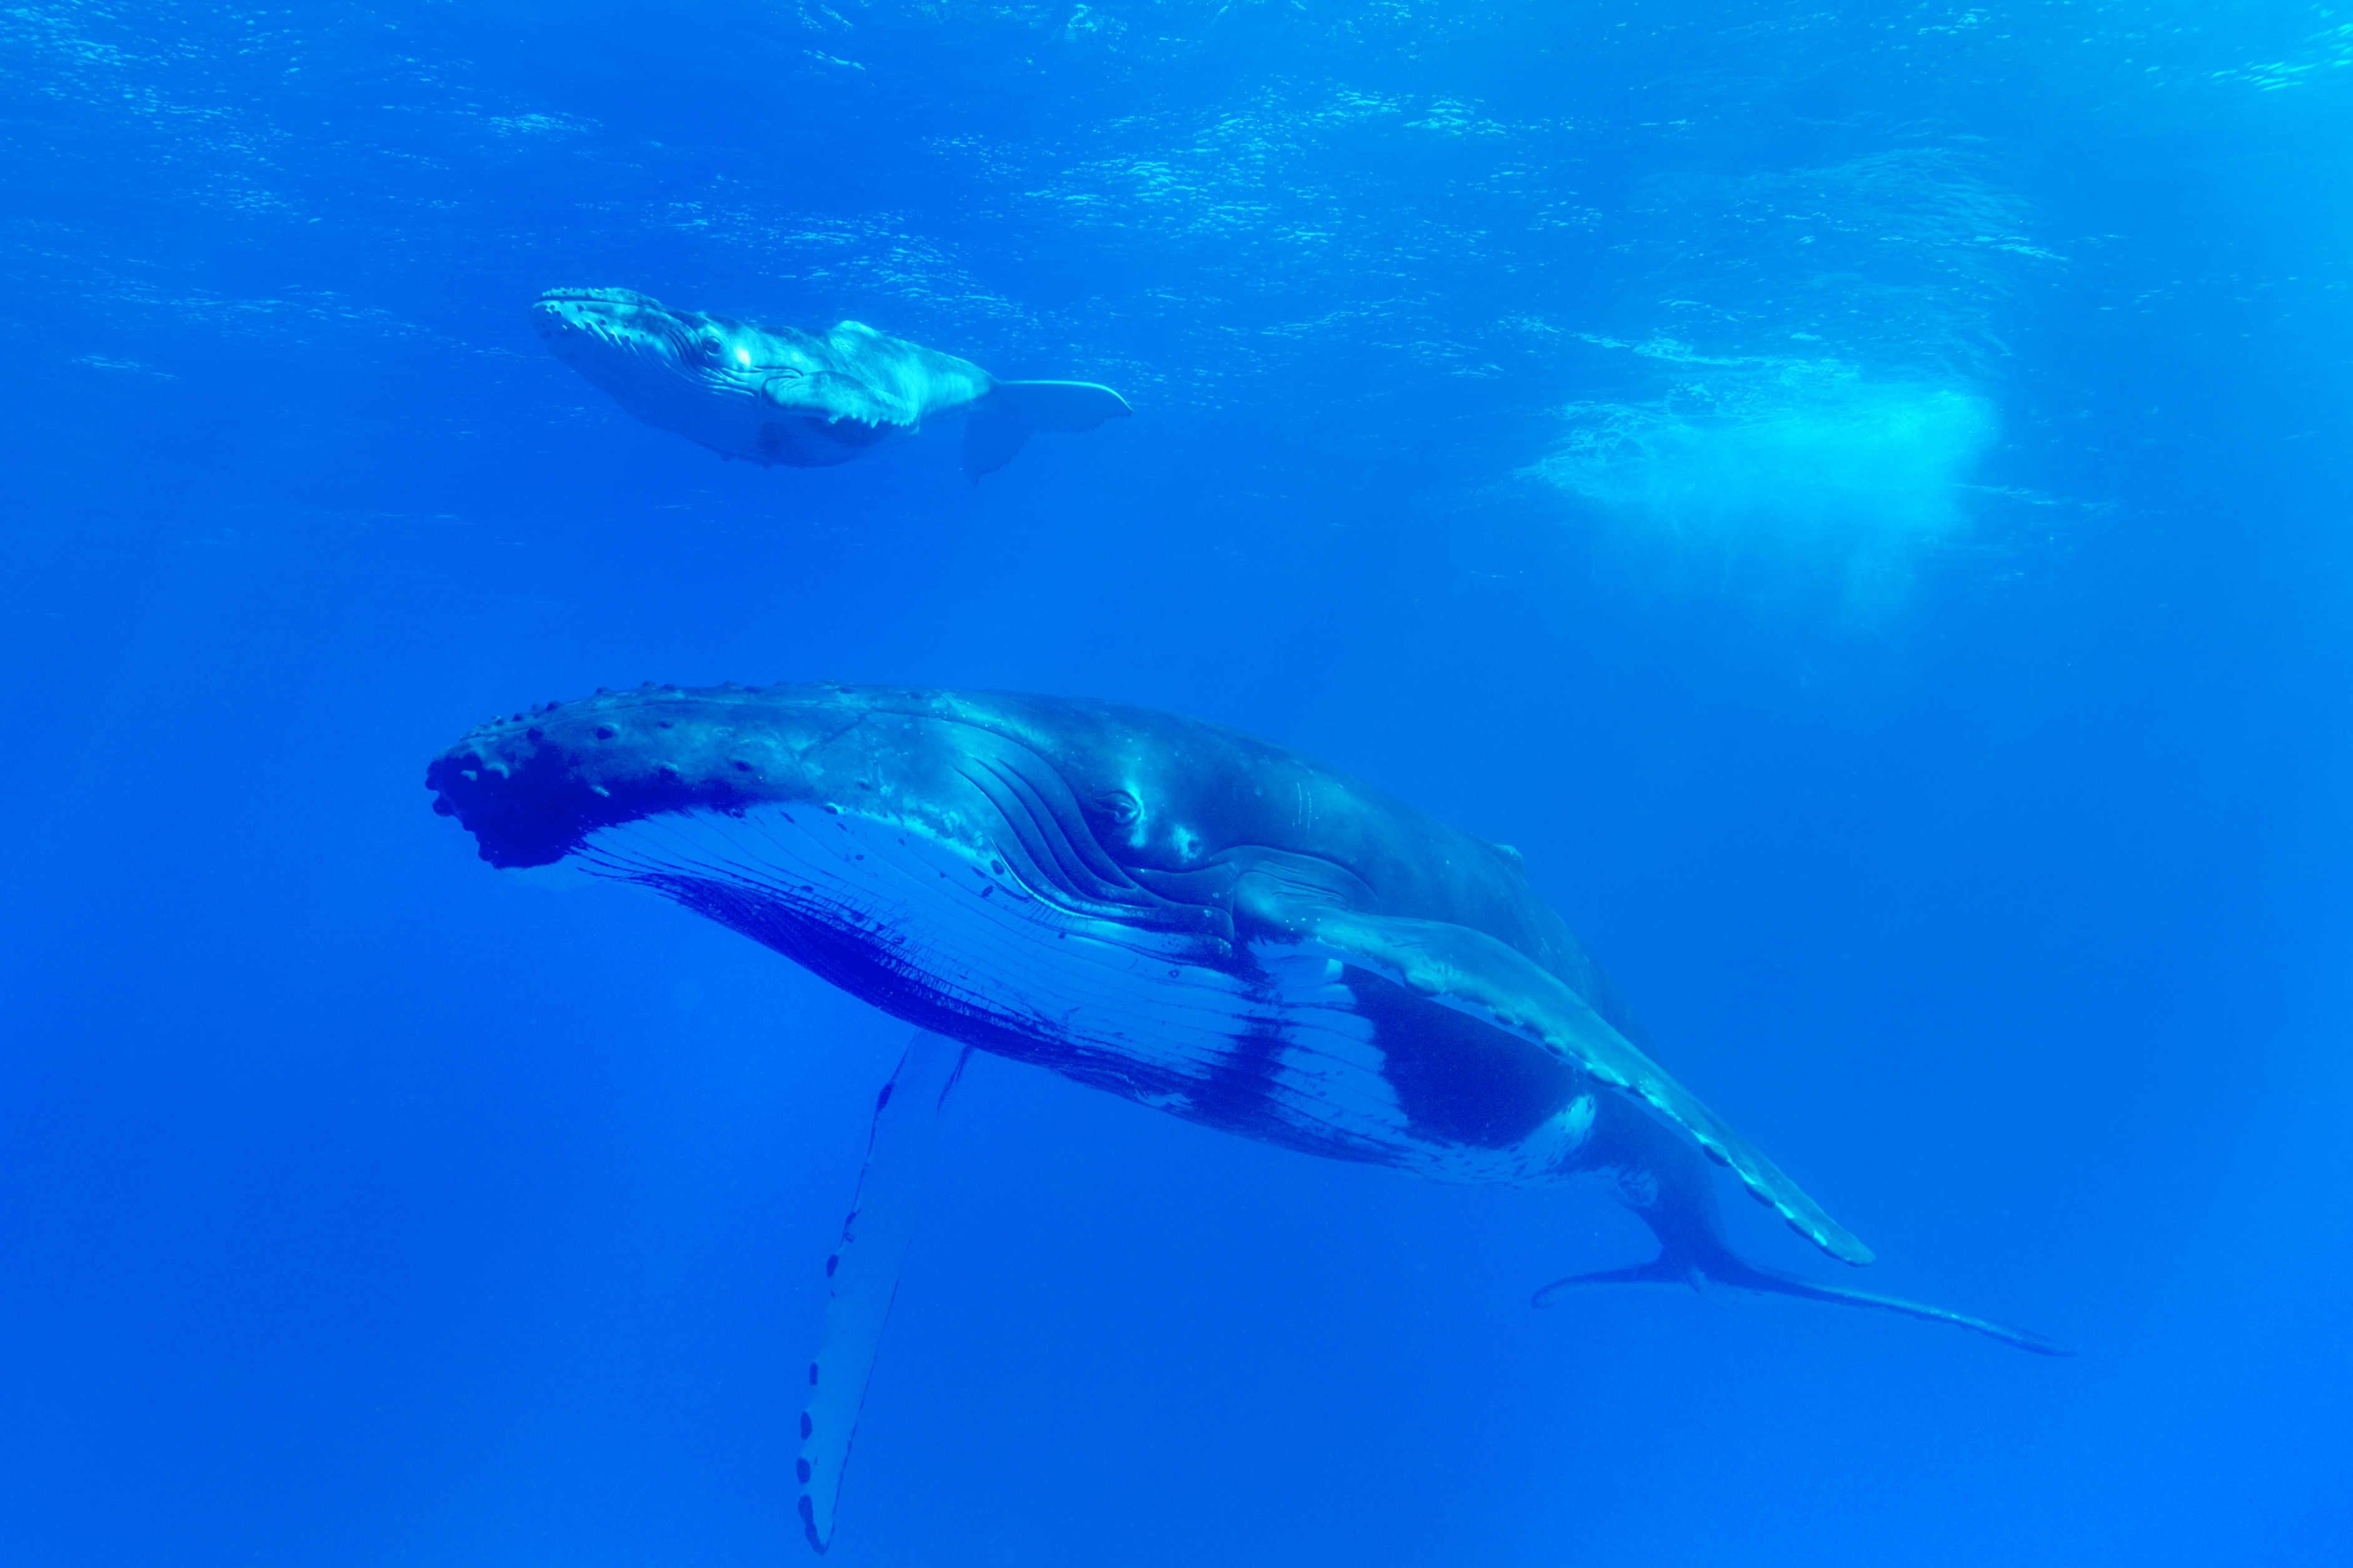 Humpback whale and Calf, Tom Jolly, Courtesy of the Marine Management Organisation